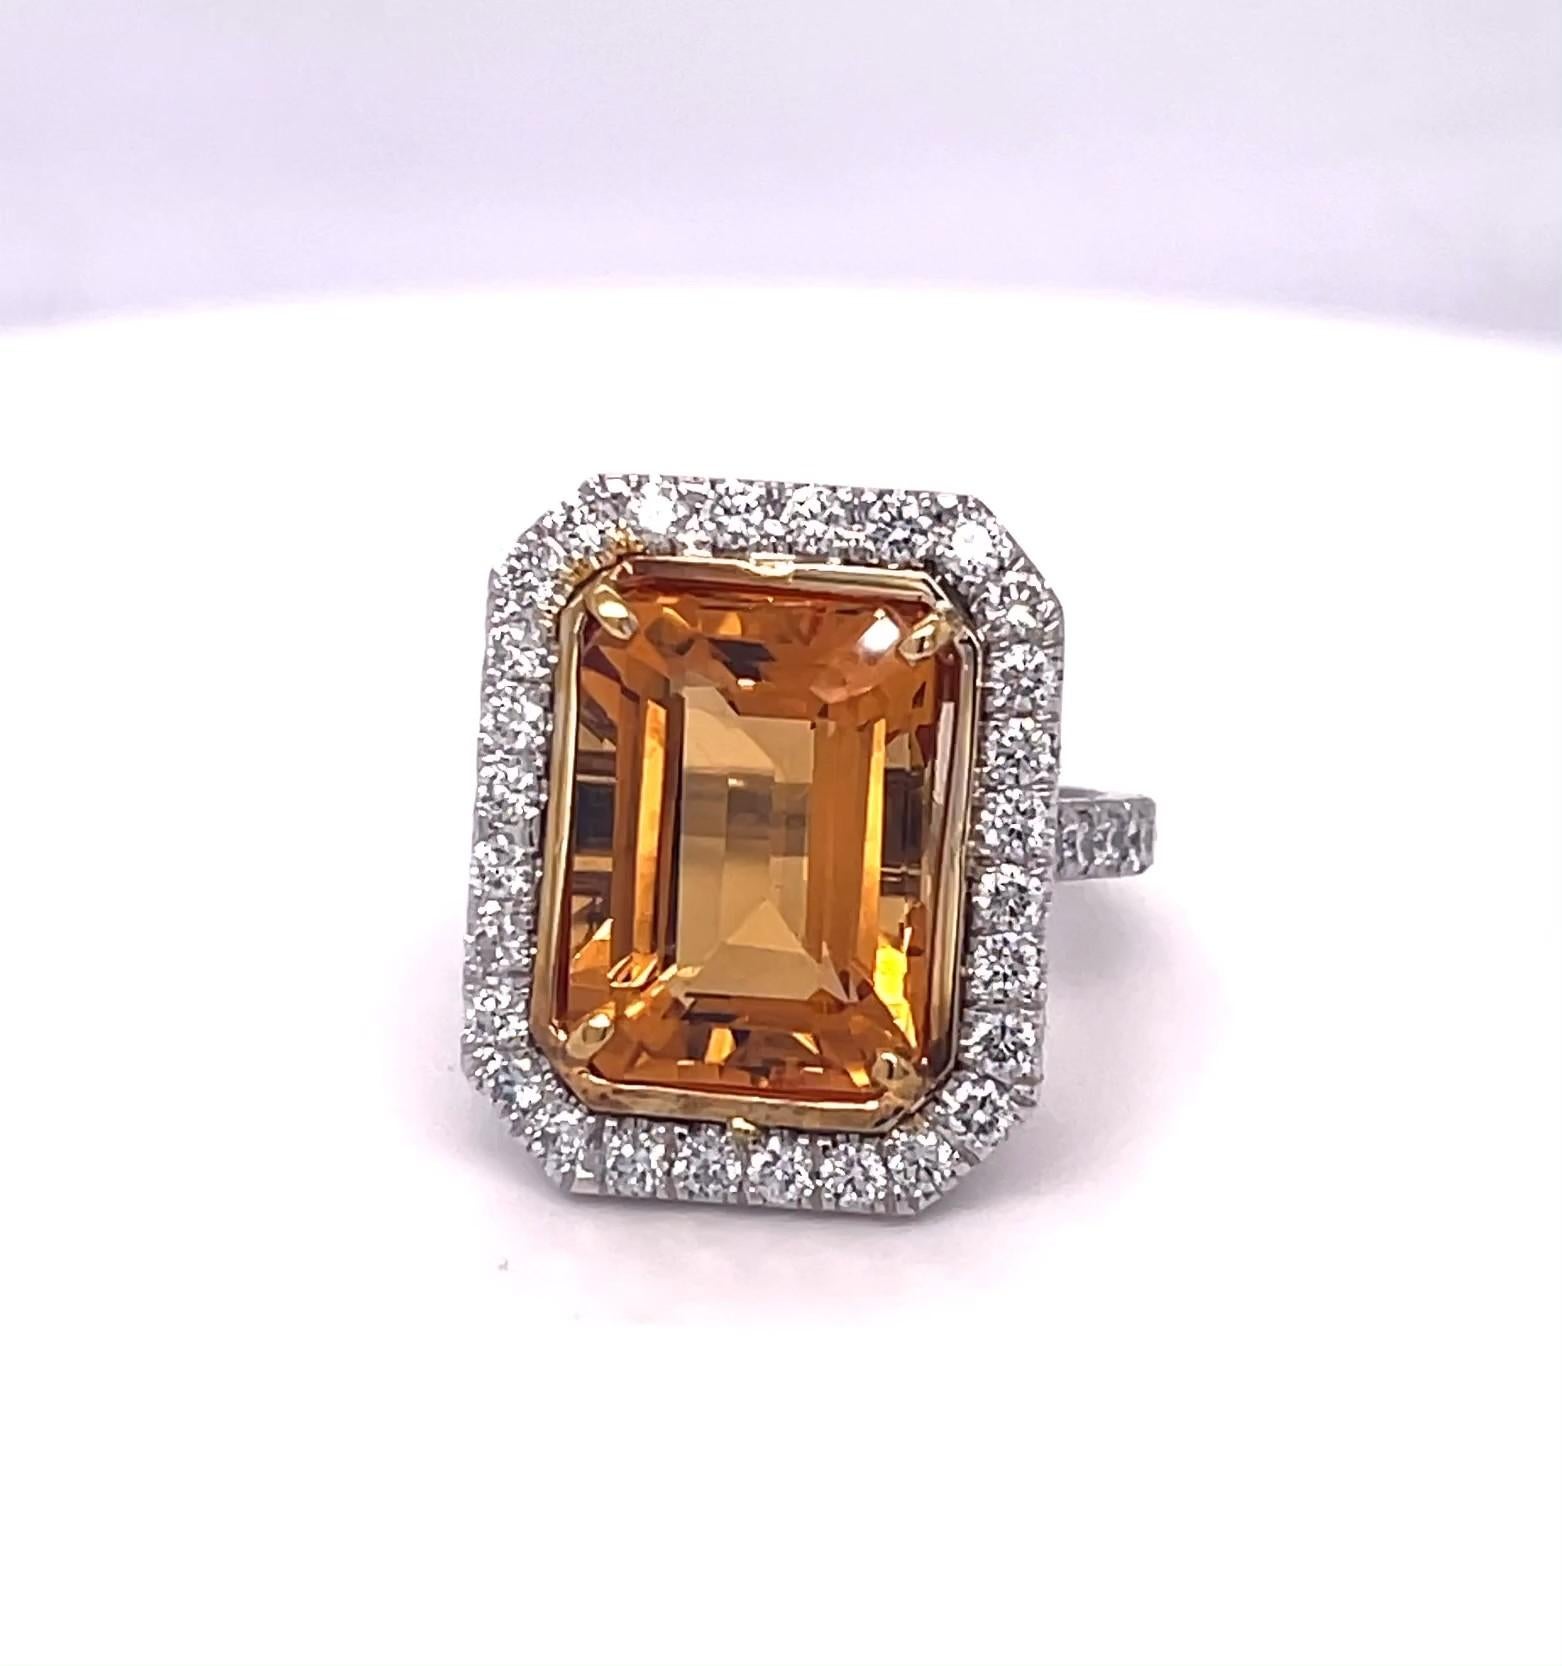 Citrine Emerald Cut and Diamond Ring

Citrine weighs 6.56 carats

Measurement: 13.30 x 9.83mm

Total Carat Weight of Diamond 1.15 carats

DEF Color VVS/VS Clarity

TOTAL CARAT WEIGHT 7.71 carats

Set in Platinum/18K Yellow Gold

Stock # J5889